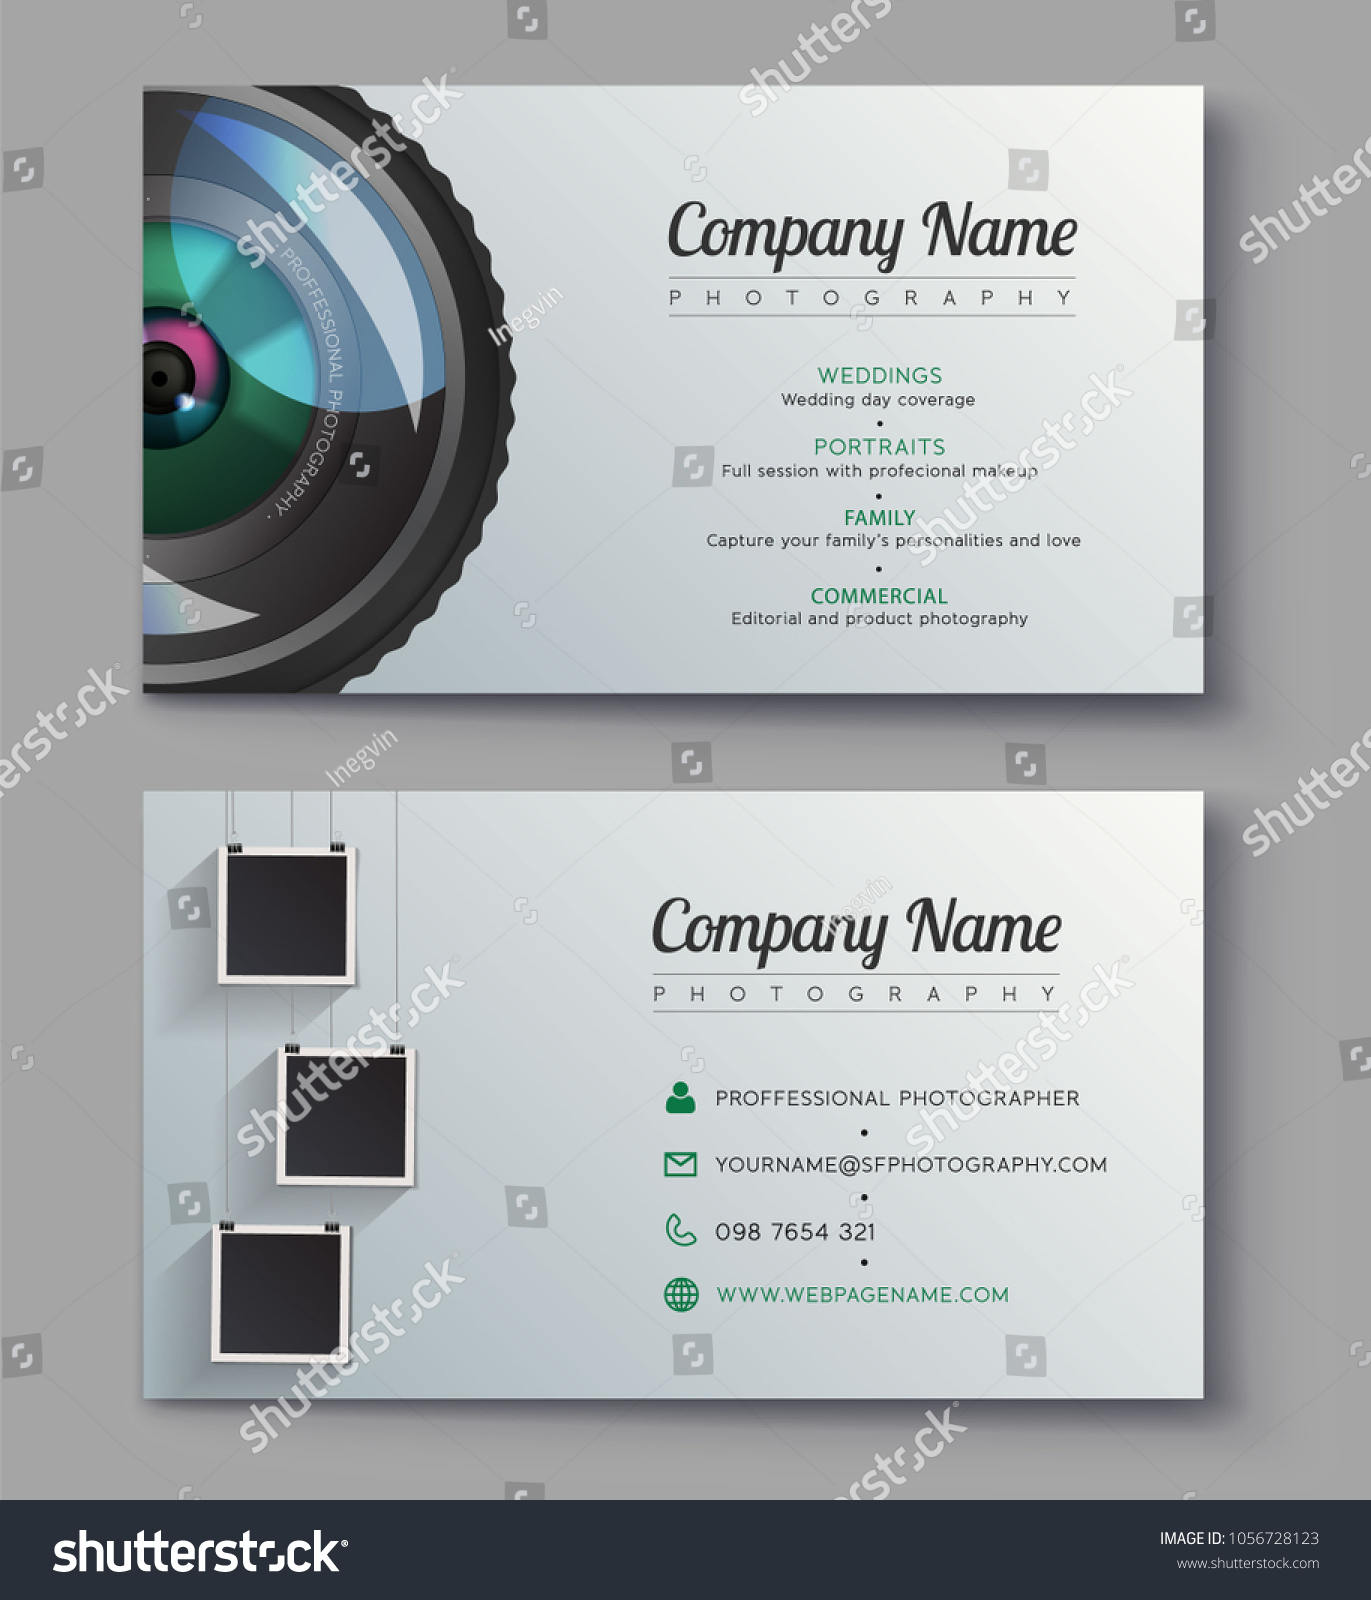 Business Card Template For Illustrator from image.shutterstock.com